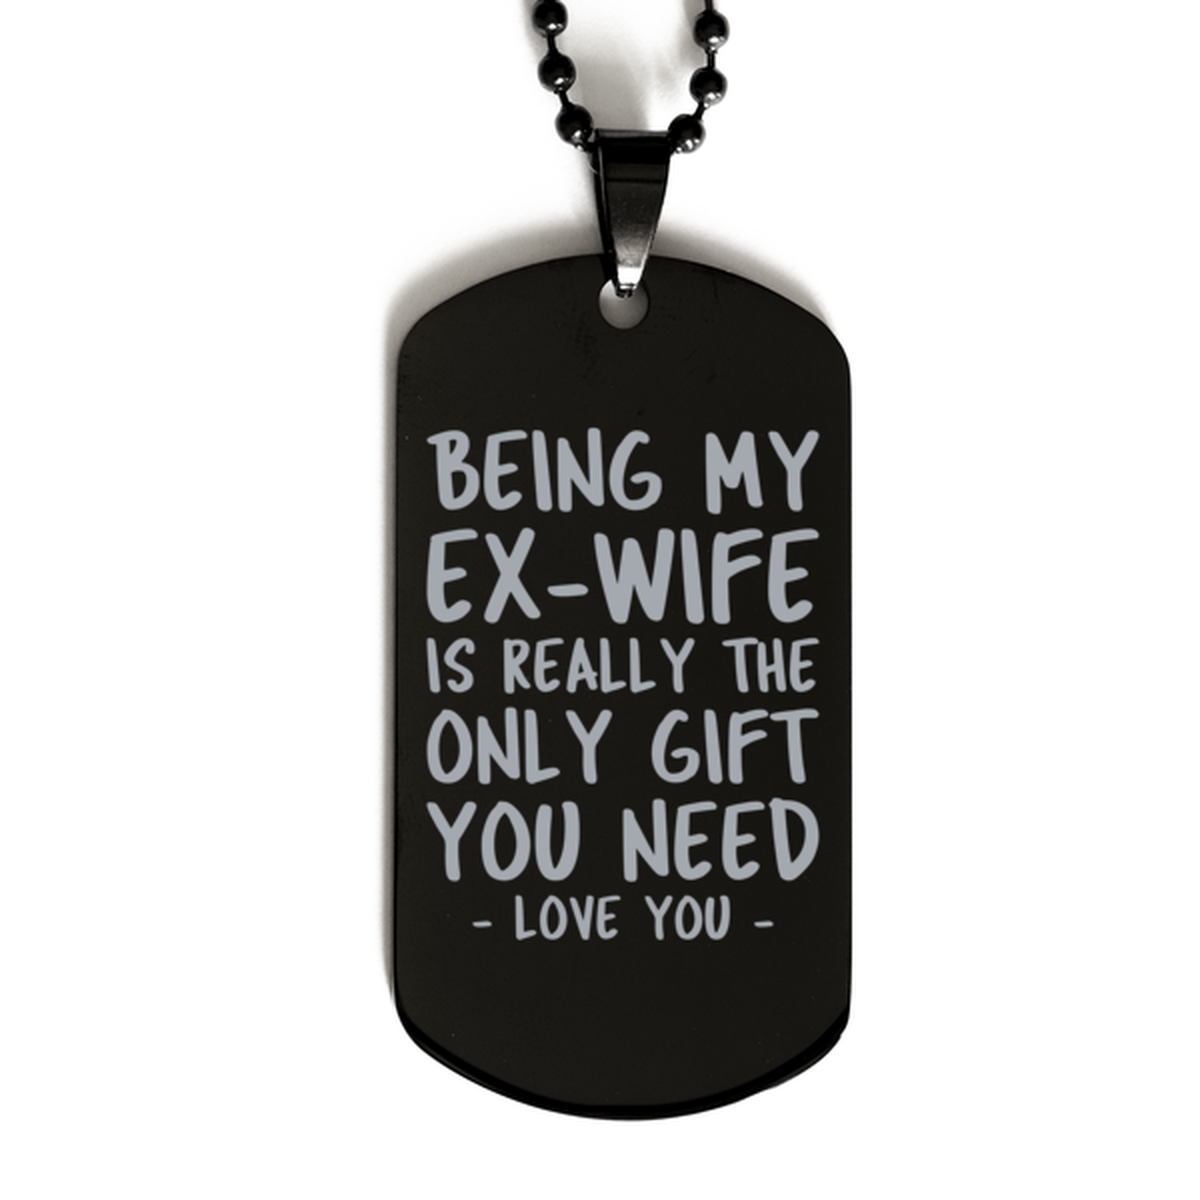 Funny Ex-wife Black Dog Tag Necklace, Being My Ex-wife Is Really the Only Gift You Need, Best Birthday Gifts for Ex-wife